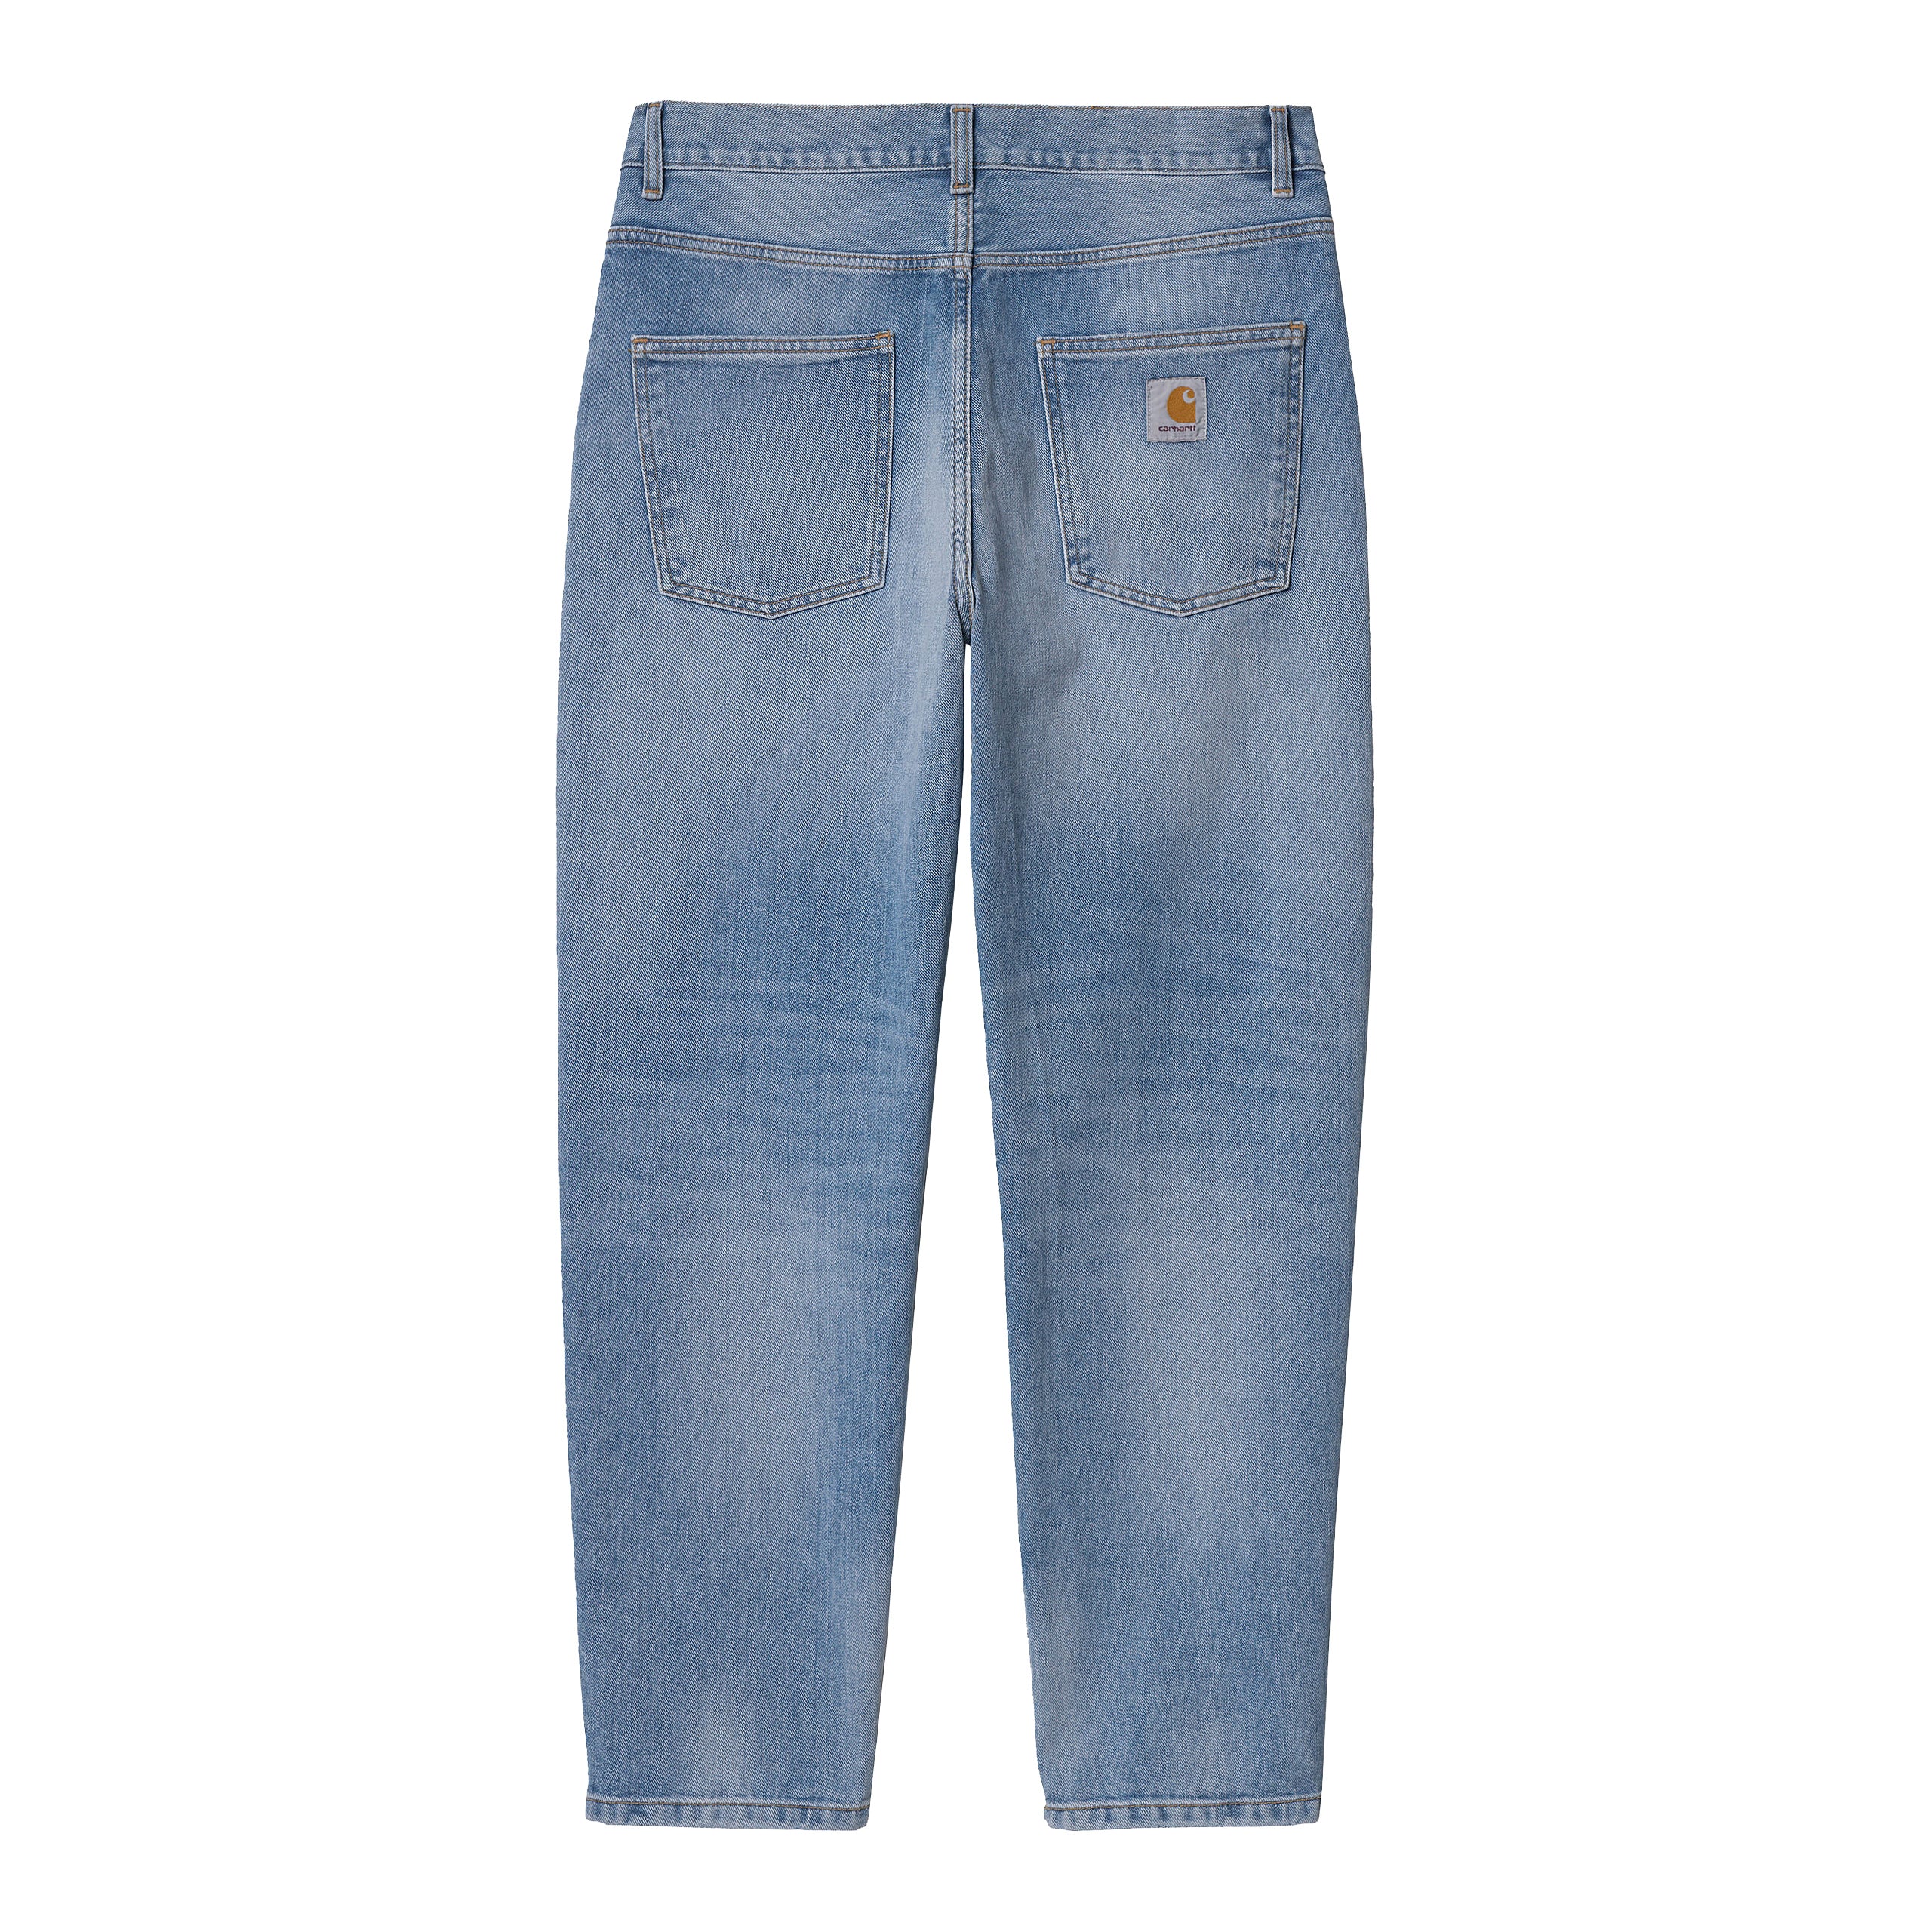 Carhartt WIP Newel Pant - Blue Light Used Washed